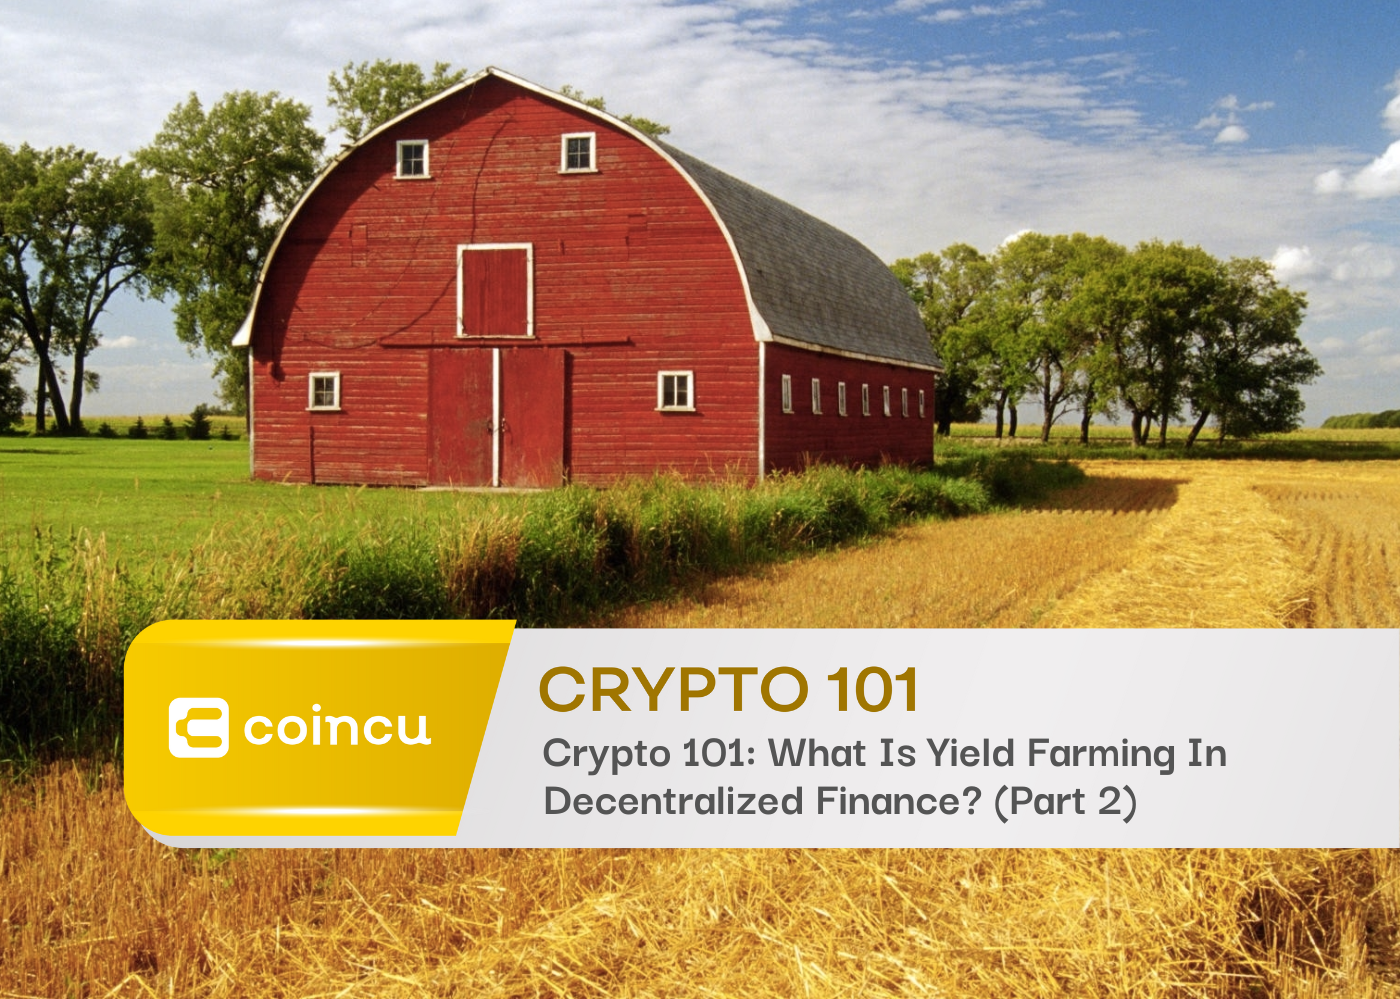 Crypto 101: What Is Yield Farming In Decentralized Finance? (Part 2)